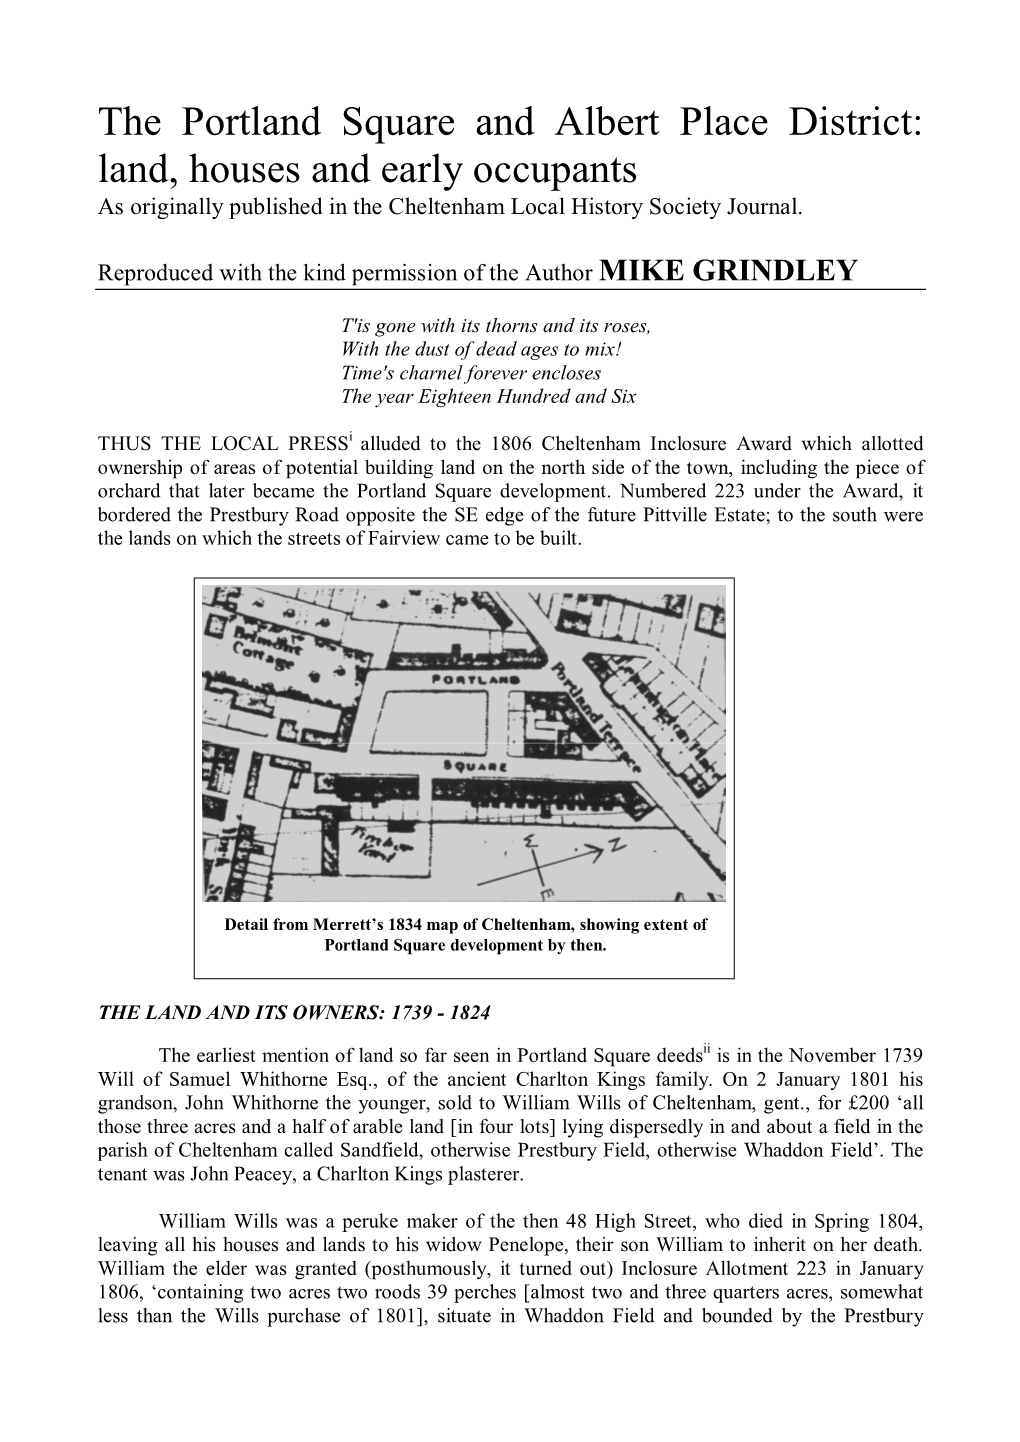 The Portland Square and Albert Place District: Land, Houses and Early Occupants As Originally Published in the Cheltenham Local History Society Journal